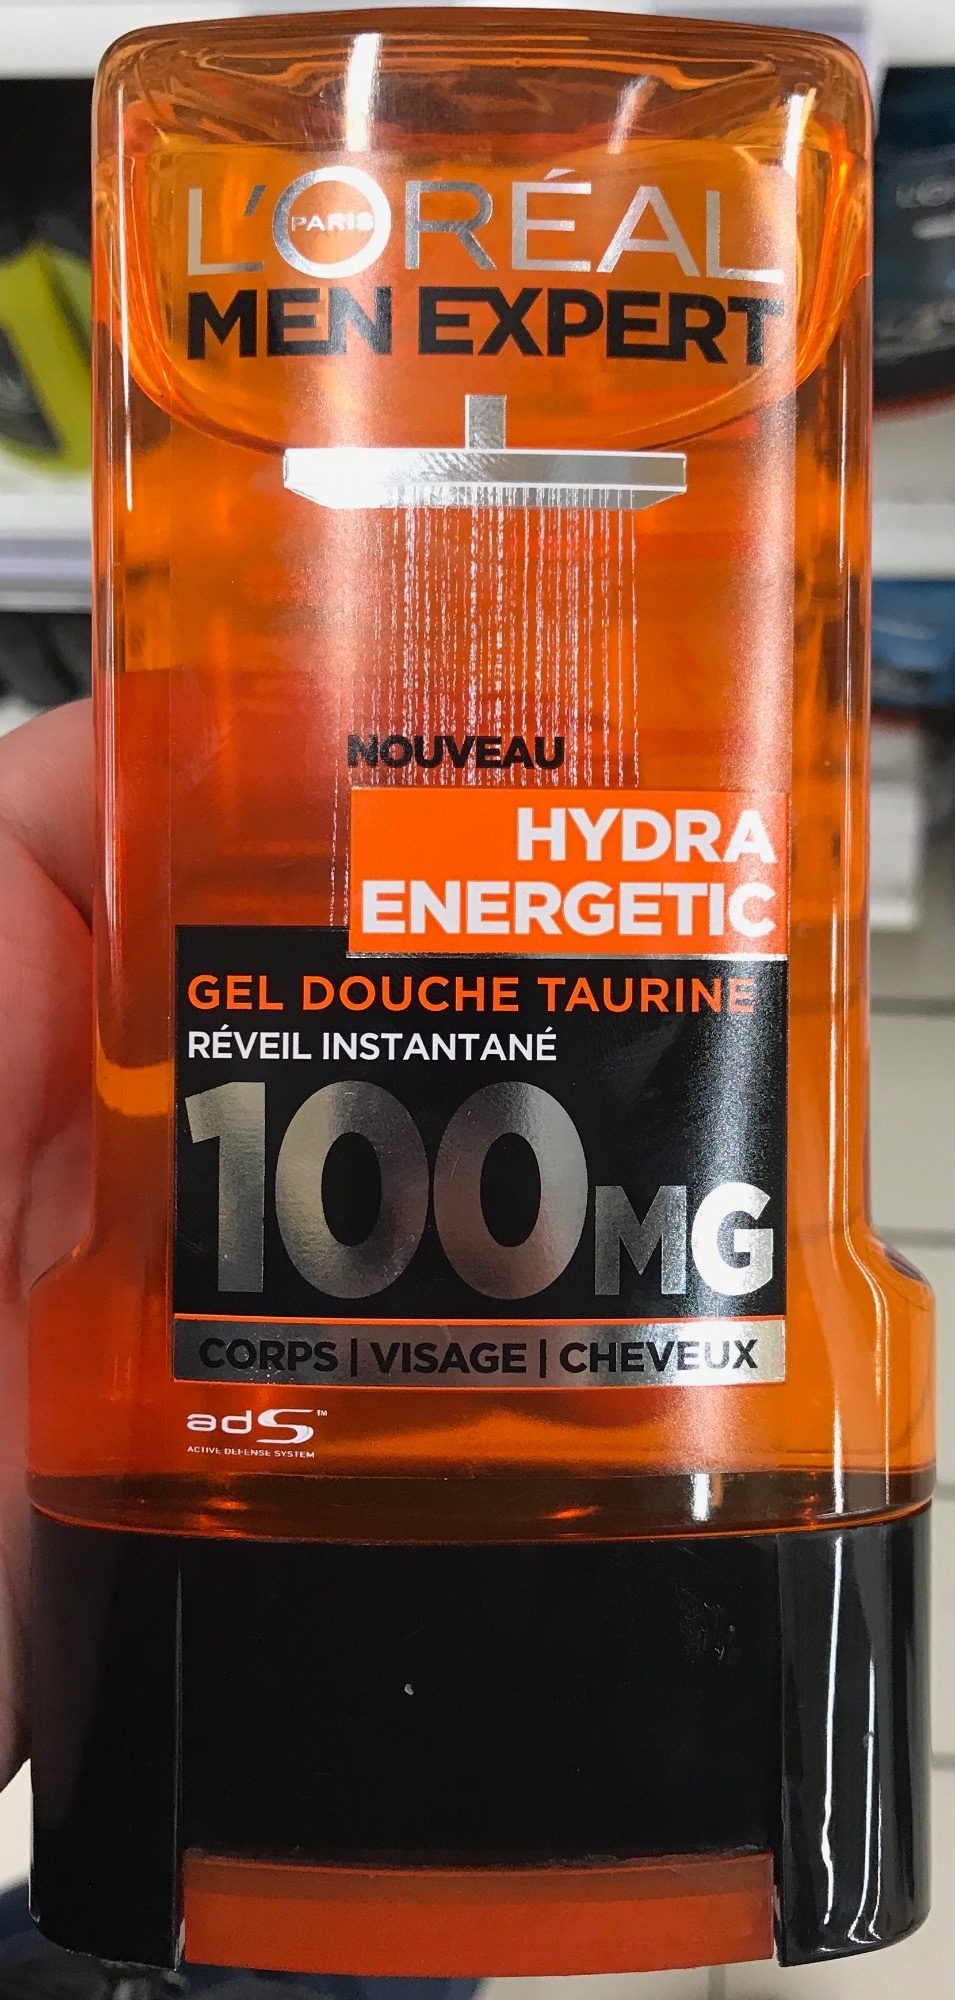 Hydra Energetic Gel douche Taurine 100mg - Product - fr